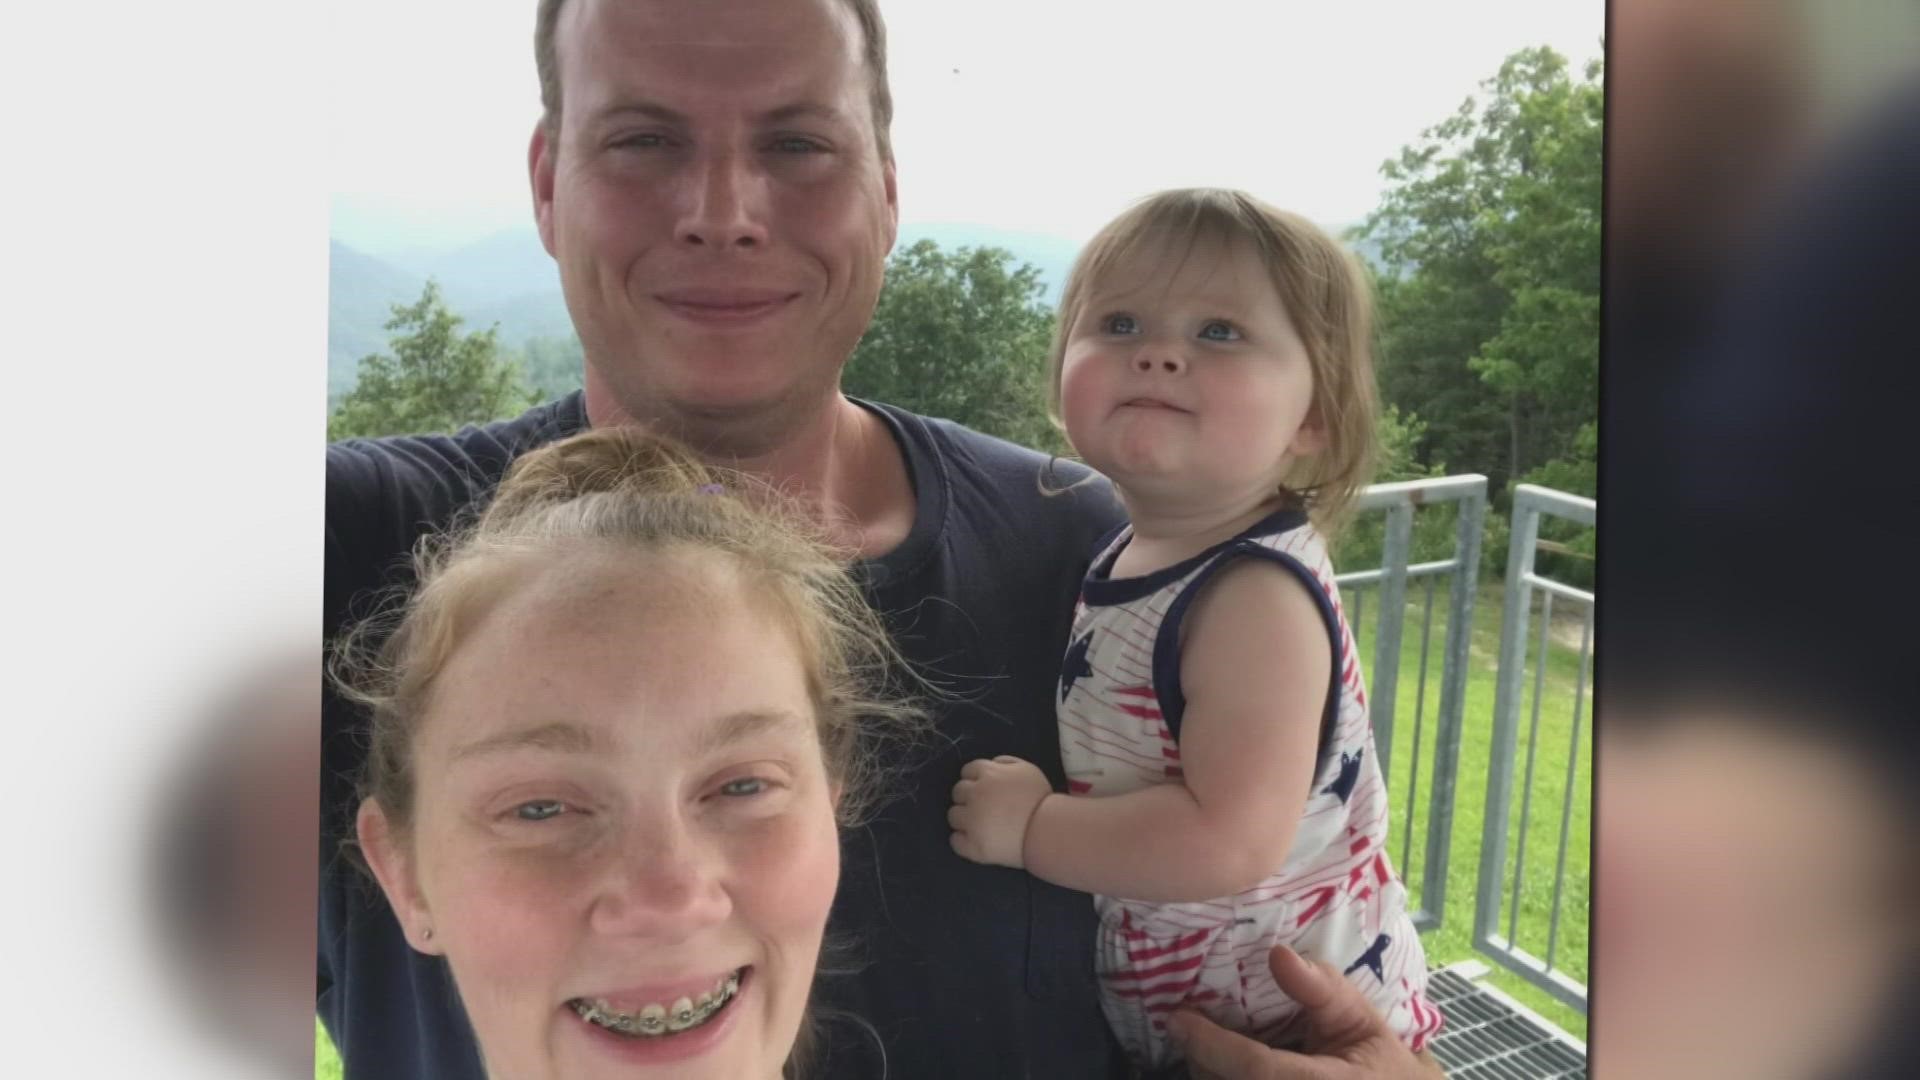 Joseph Carter was a veteran, father of three children and a husband. Police say was killed by his neighbor and now his wife is fighting for justice.